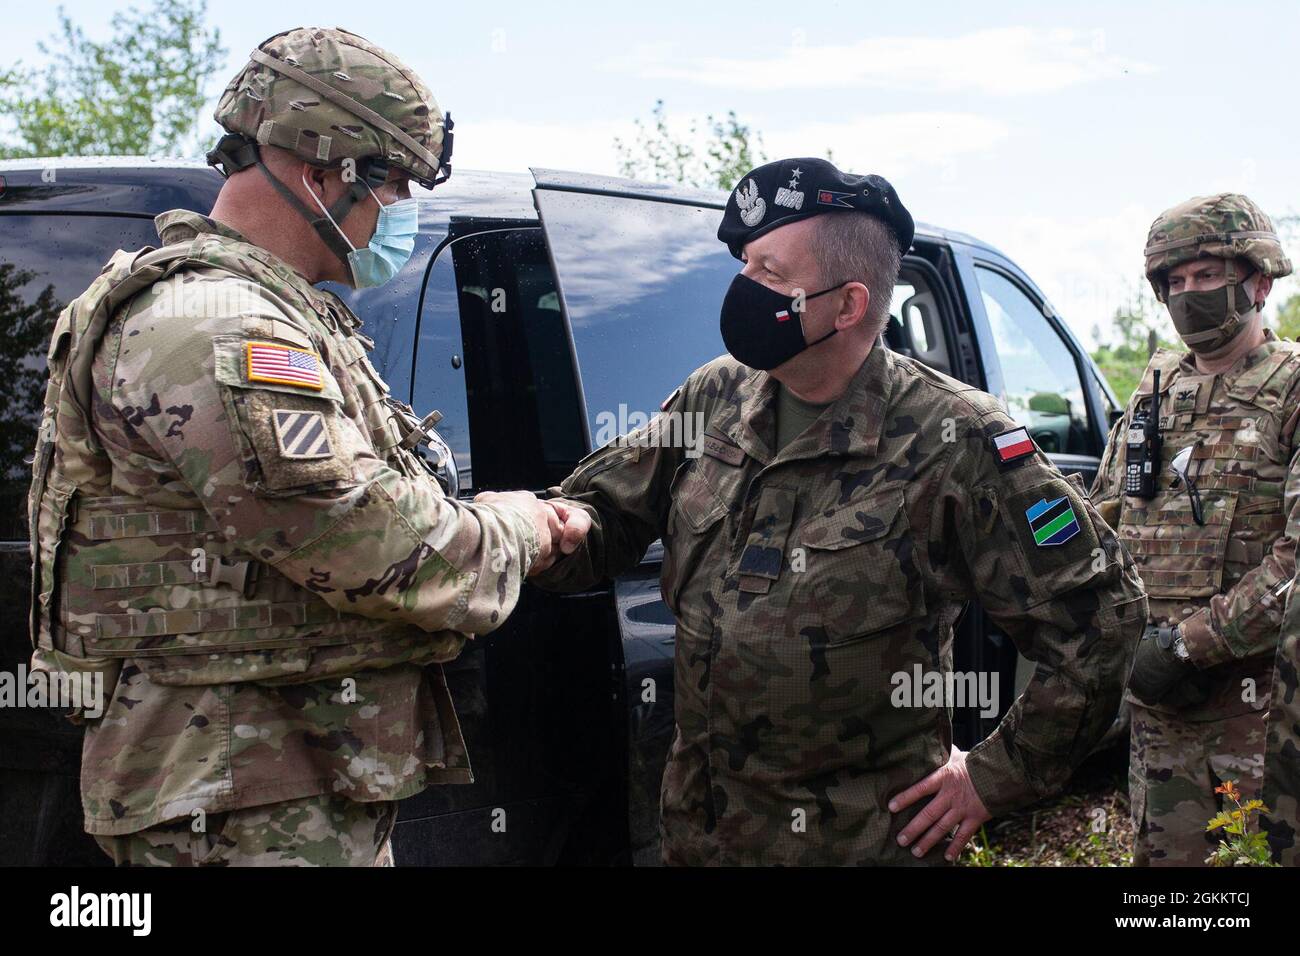 U.S. Army Lt. Gen. Roger L. Cloutier Jr. , commander of the Allied Land Command, left, shakes hands with Polish Army Inspector of the Land Forces, Maj. Gen. Maciej Jablonski, May 20, 2021, Artillery and Armament Training Center, during the Dynamic Front 21 training exercise in Torun, Poland. Dynamic Front 21 is a 7th Army Training Command-led, U.S. Army Europe and Africa-directed exercise designed to increase readiness, lethality and interoperability by exercising allied an d partner nations' ability to integrate joint fires in a multinational environment at both the operational and tactical l Stock Photo